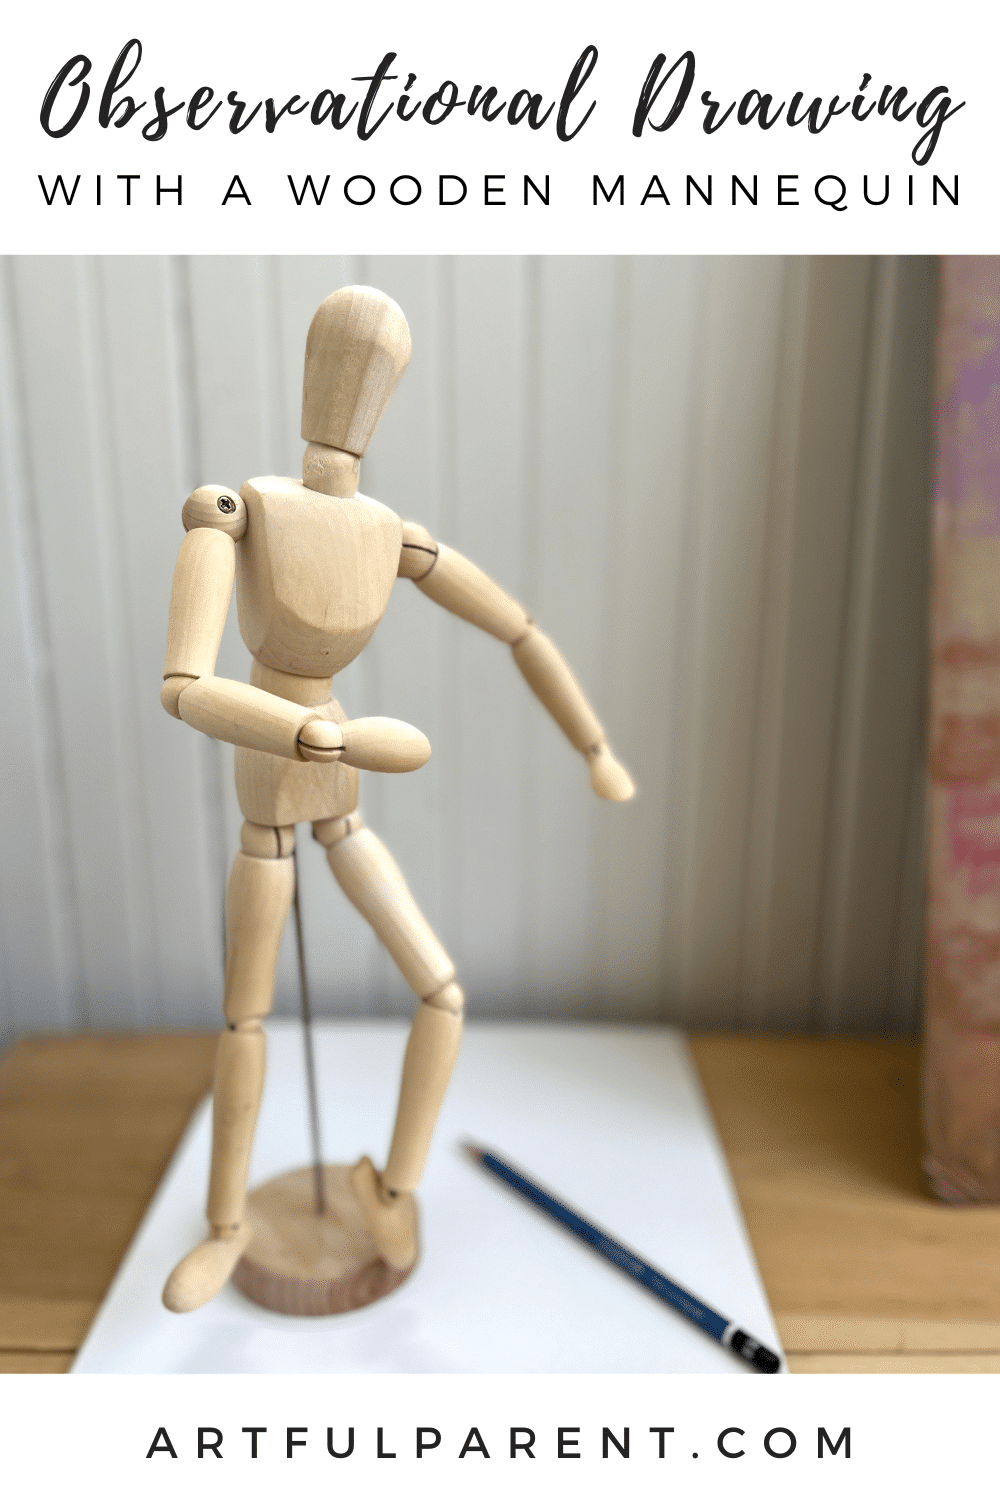 Observational Drawing Using a Wood Mannequin